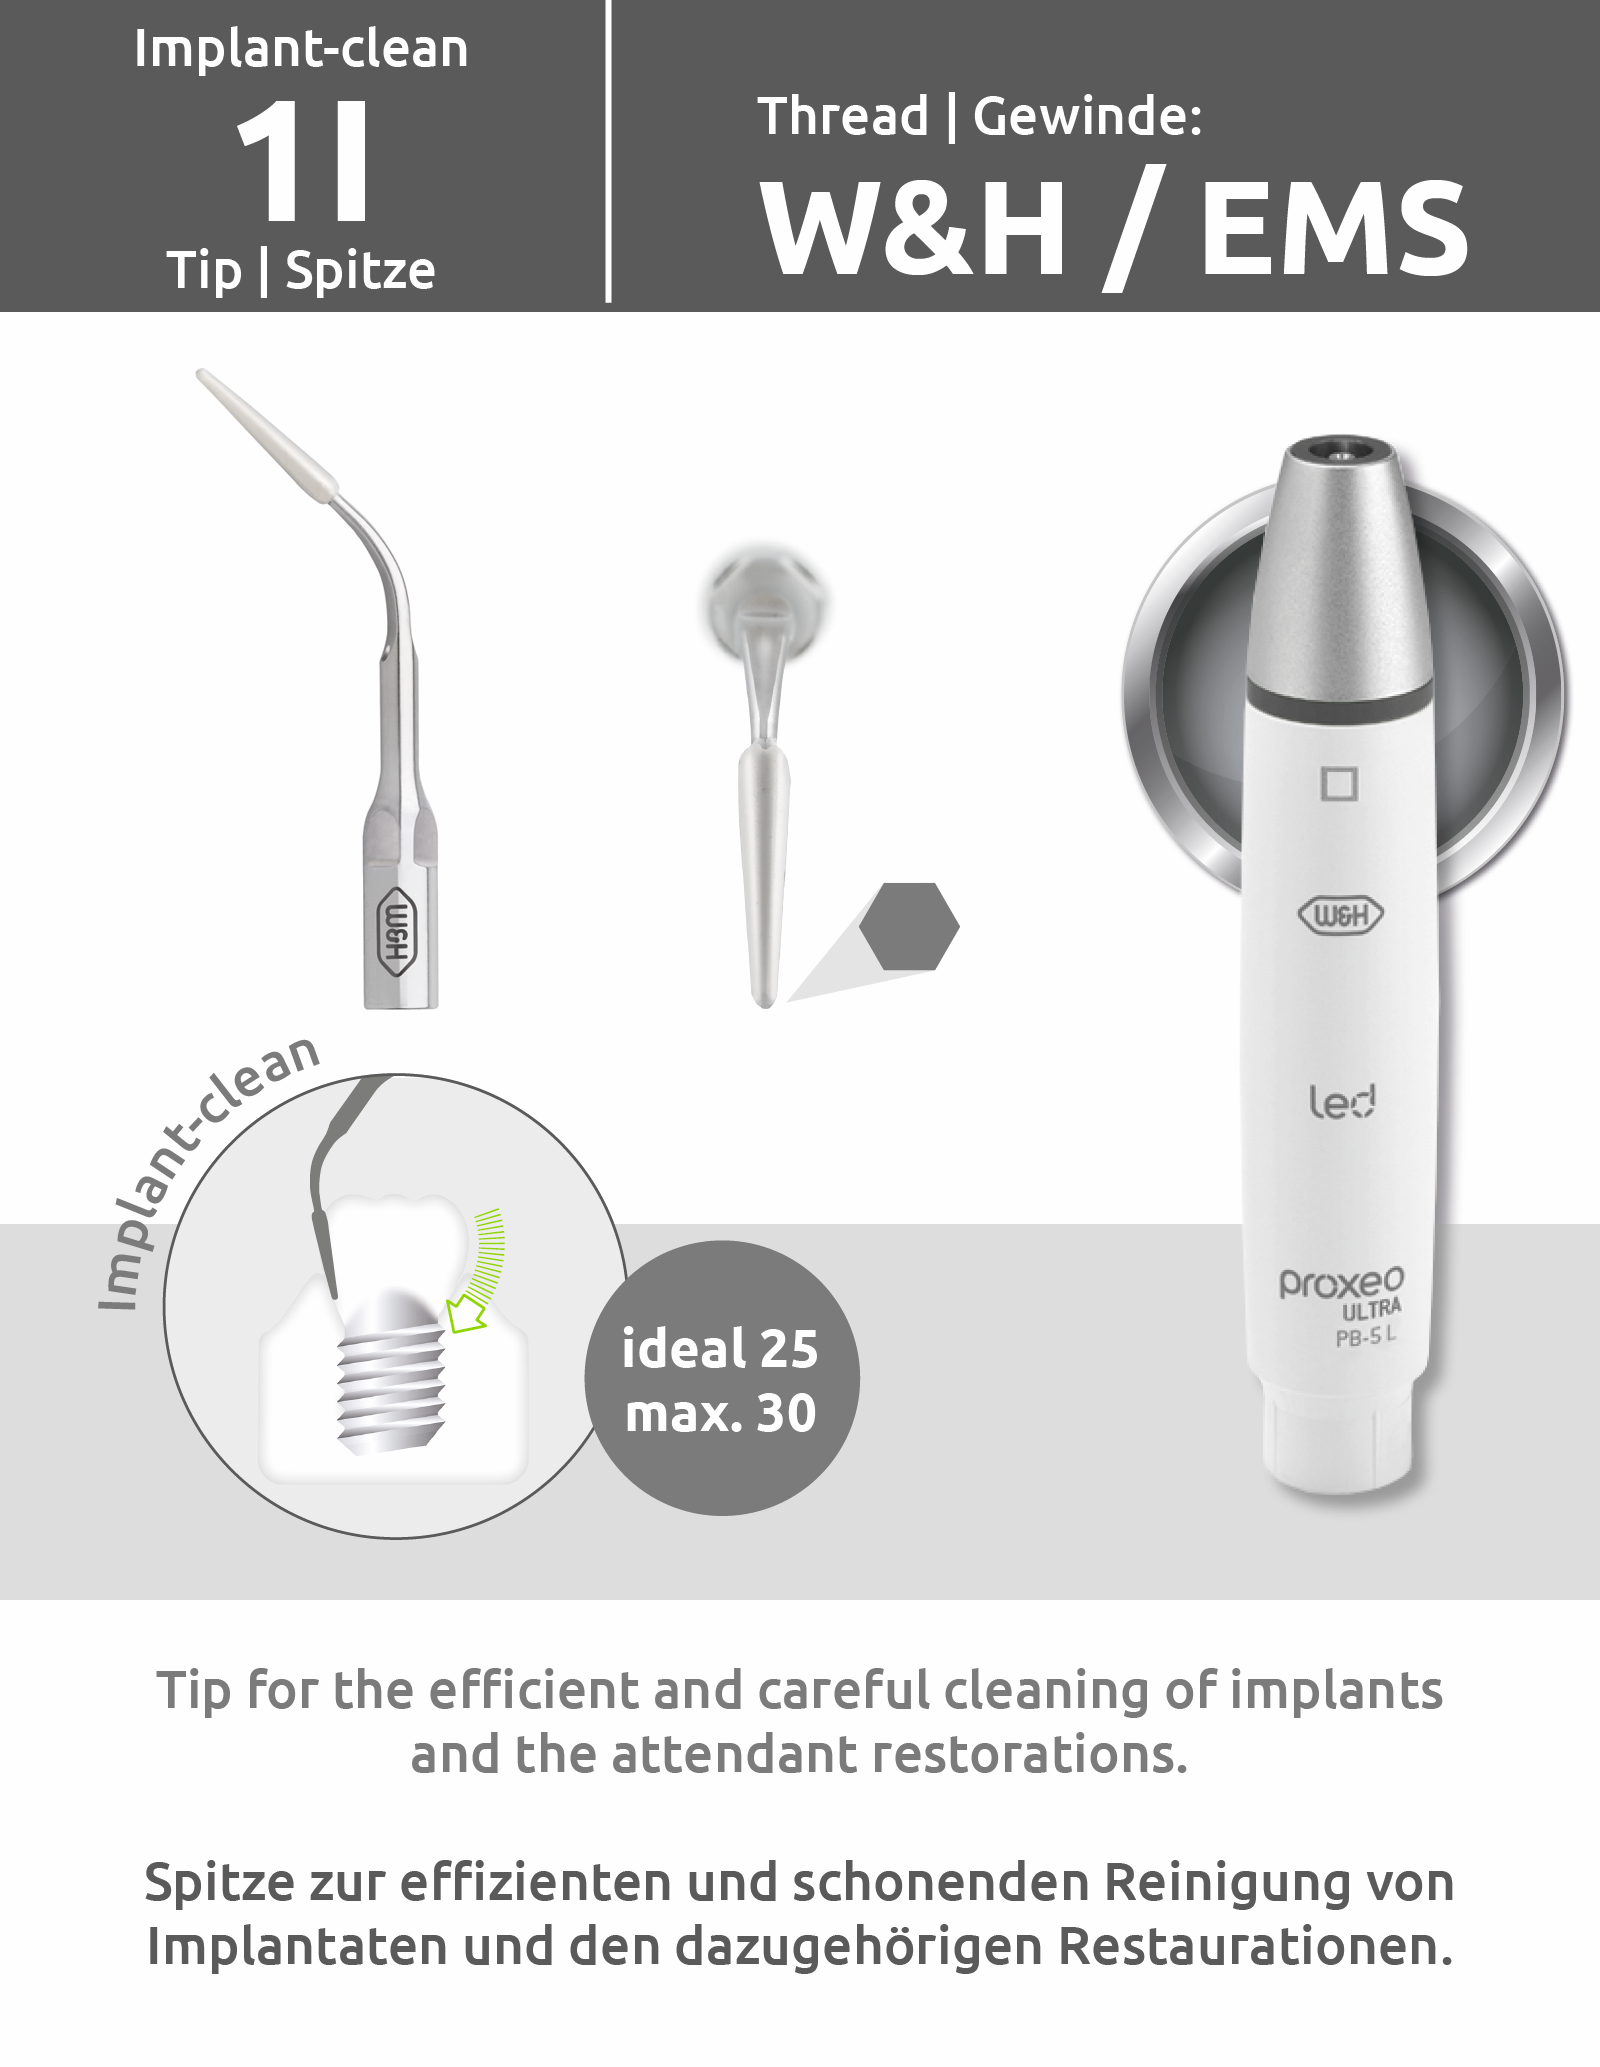 Tip set 1L (3 pcs.) (W&H/EMS thread) Implant-clean with changer